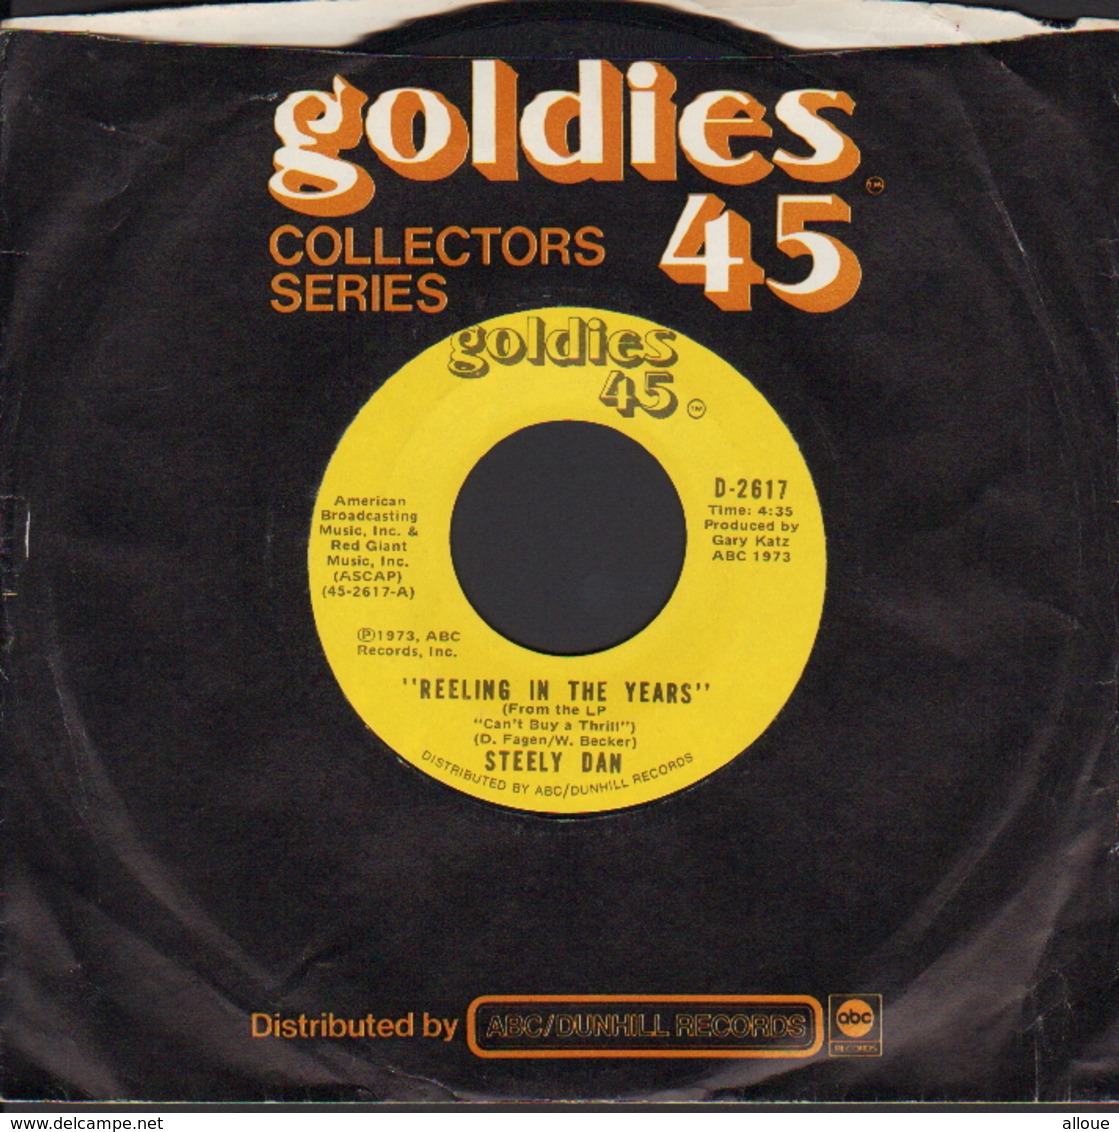 STEELY DAN - FR SINGLE ABC - GOLDIES 45 COLLECTORS SERIES  1973 - REELING IN THE YEARS + ONLY A FOOL WOULD SAY THAT - Rock